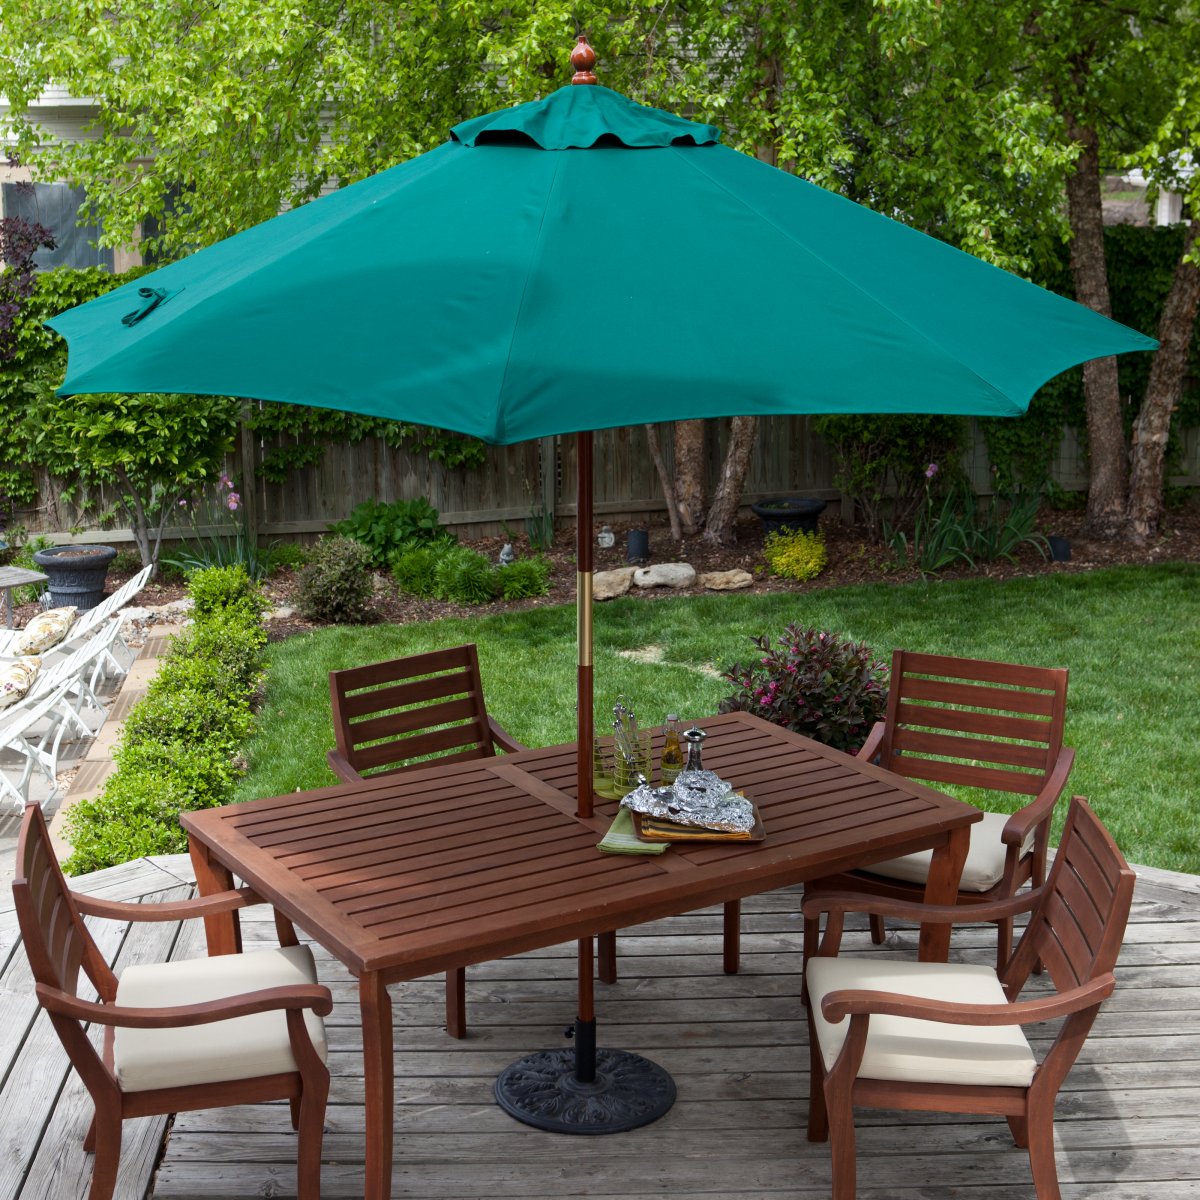 Outdoor Patio Dining Table Top Options with Umbrella Holes